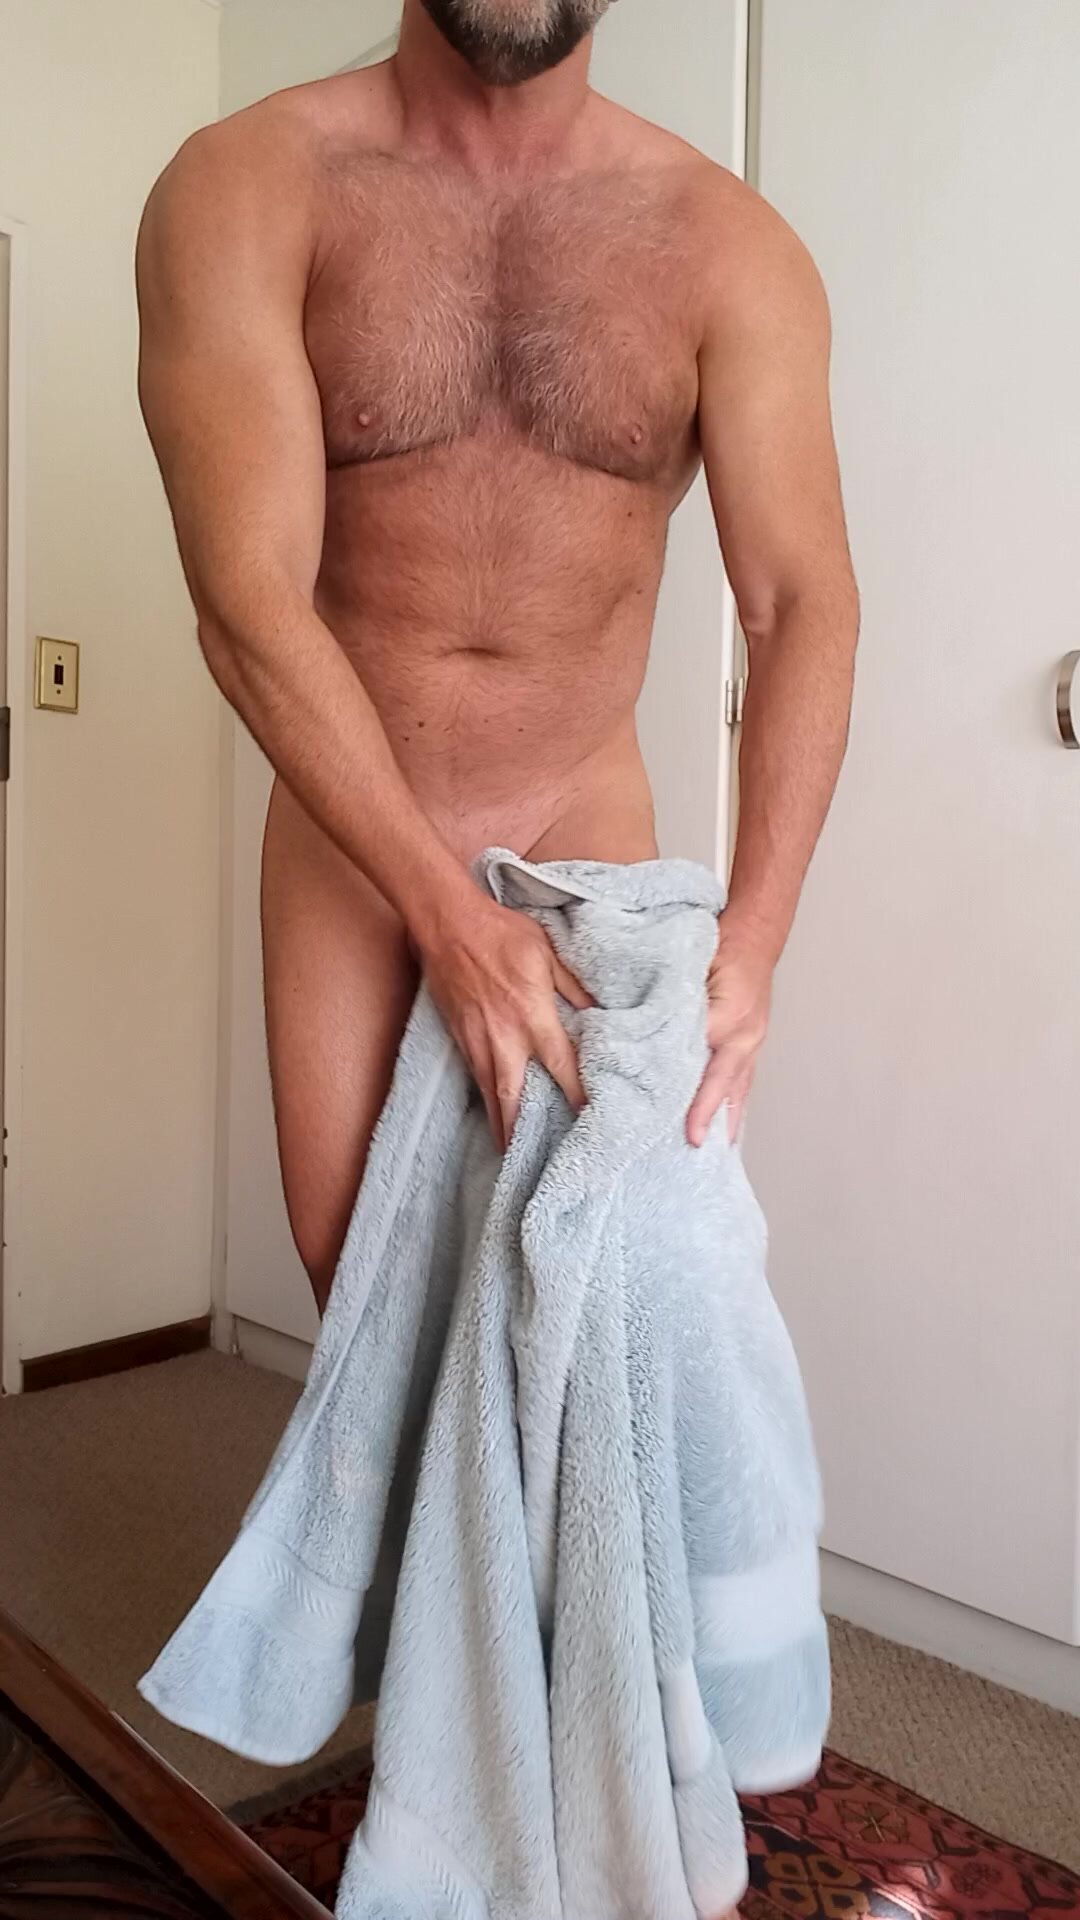 Fresh from the shower